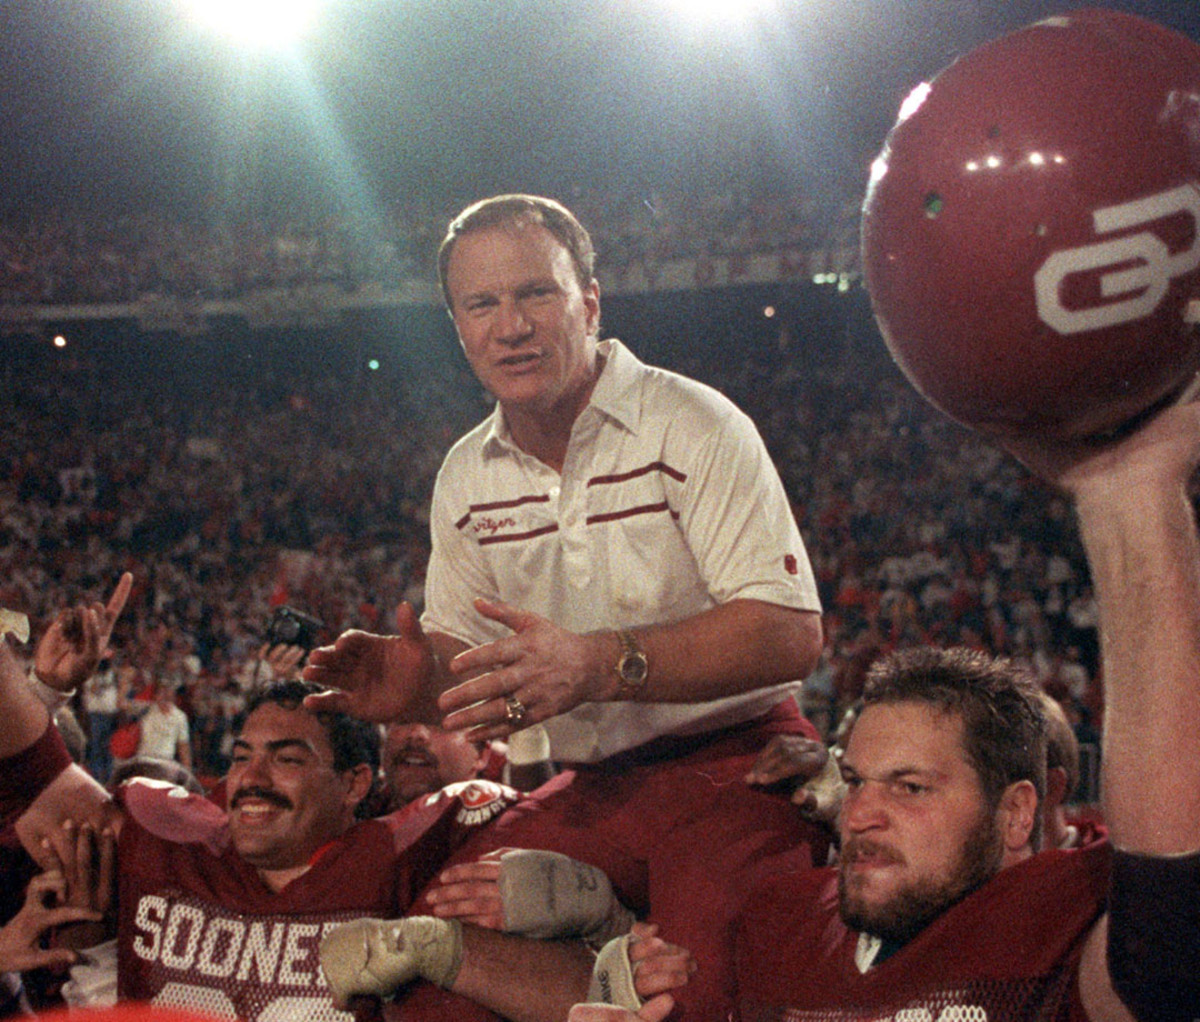 Barry Switzer with his Oklahoma Sooners after their victory over Penn State in 1986